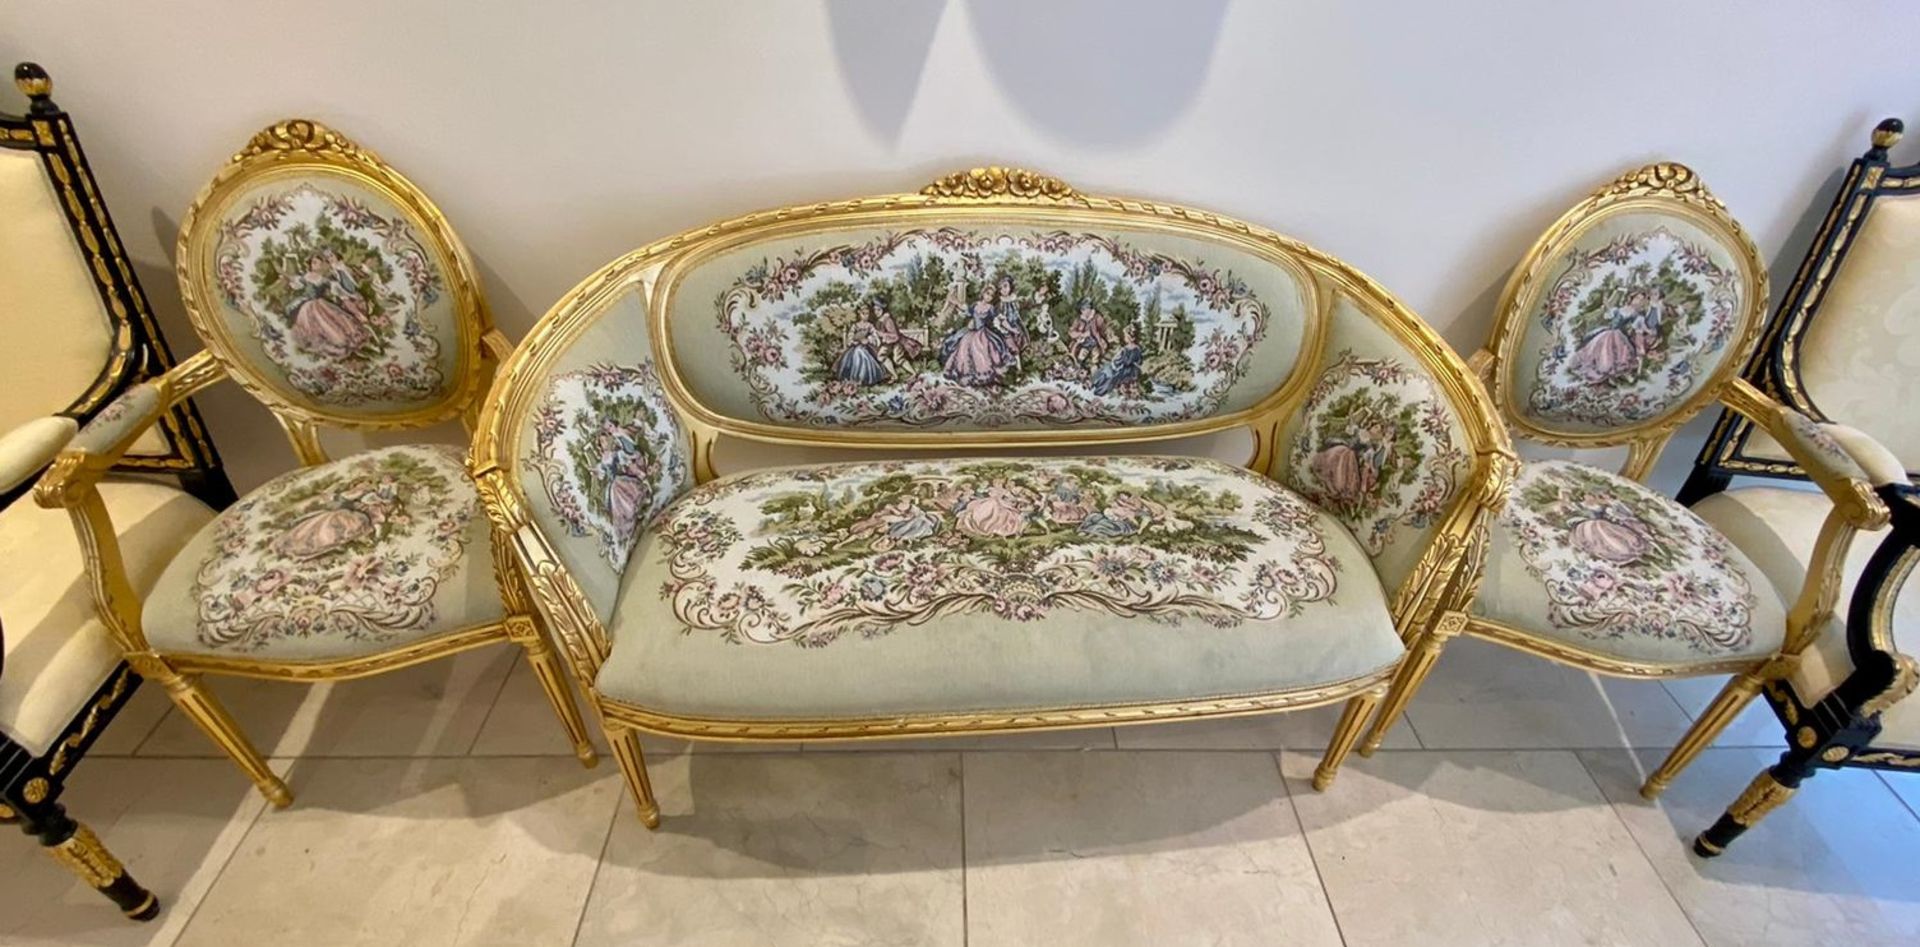 1 x Louis XVI French Style Three-Piece Salon Suite With Tapestry Upholstery and Carved Gold - Image 26 of 37